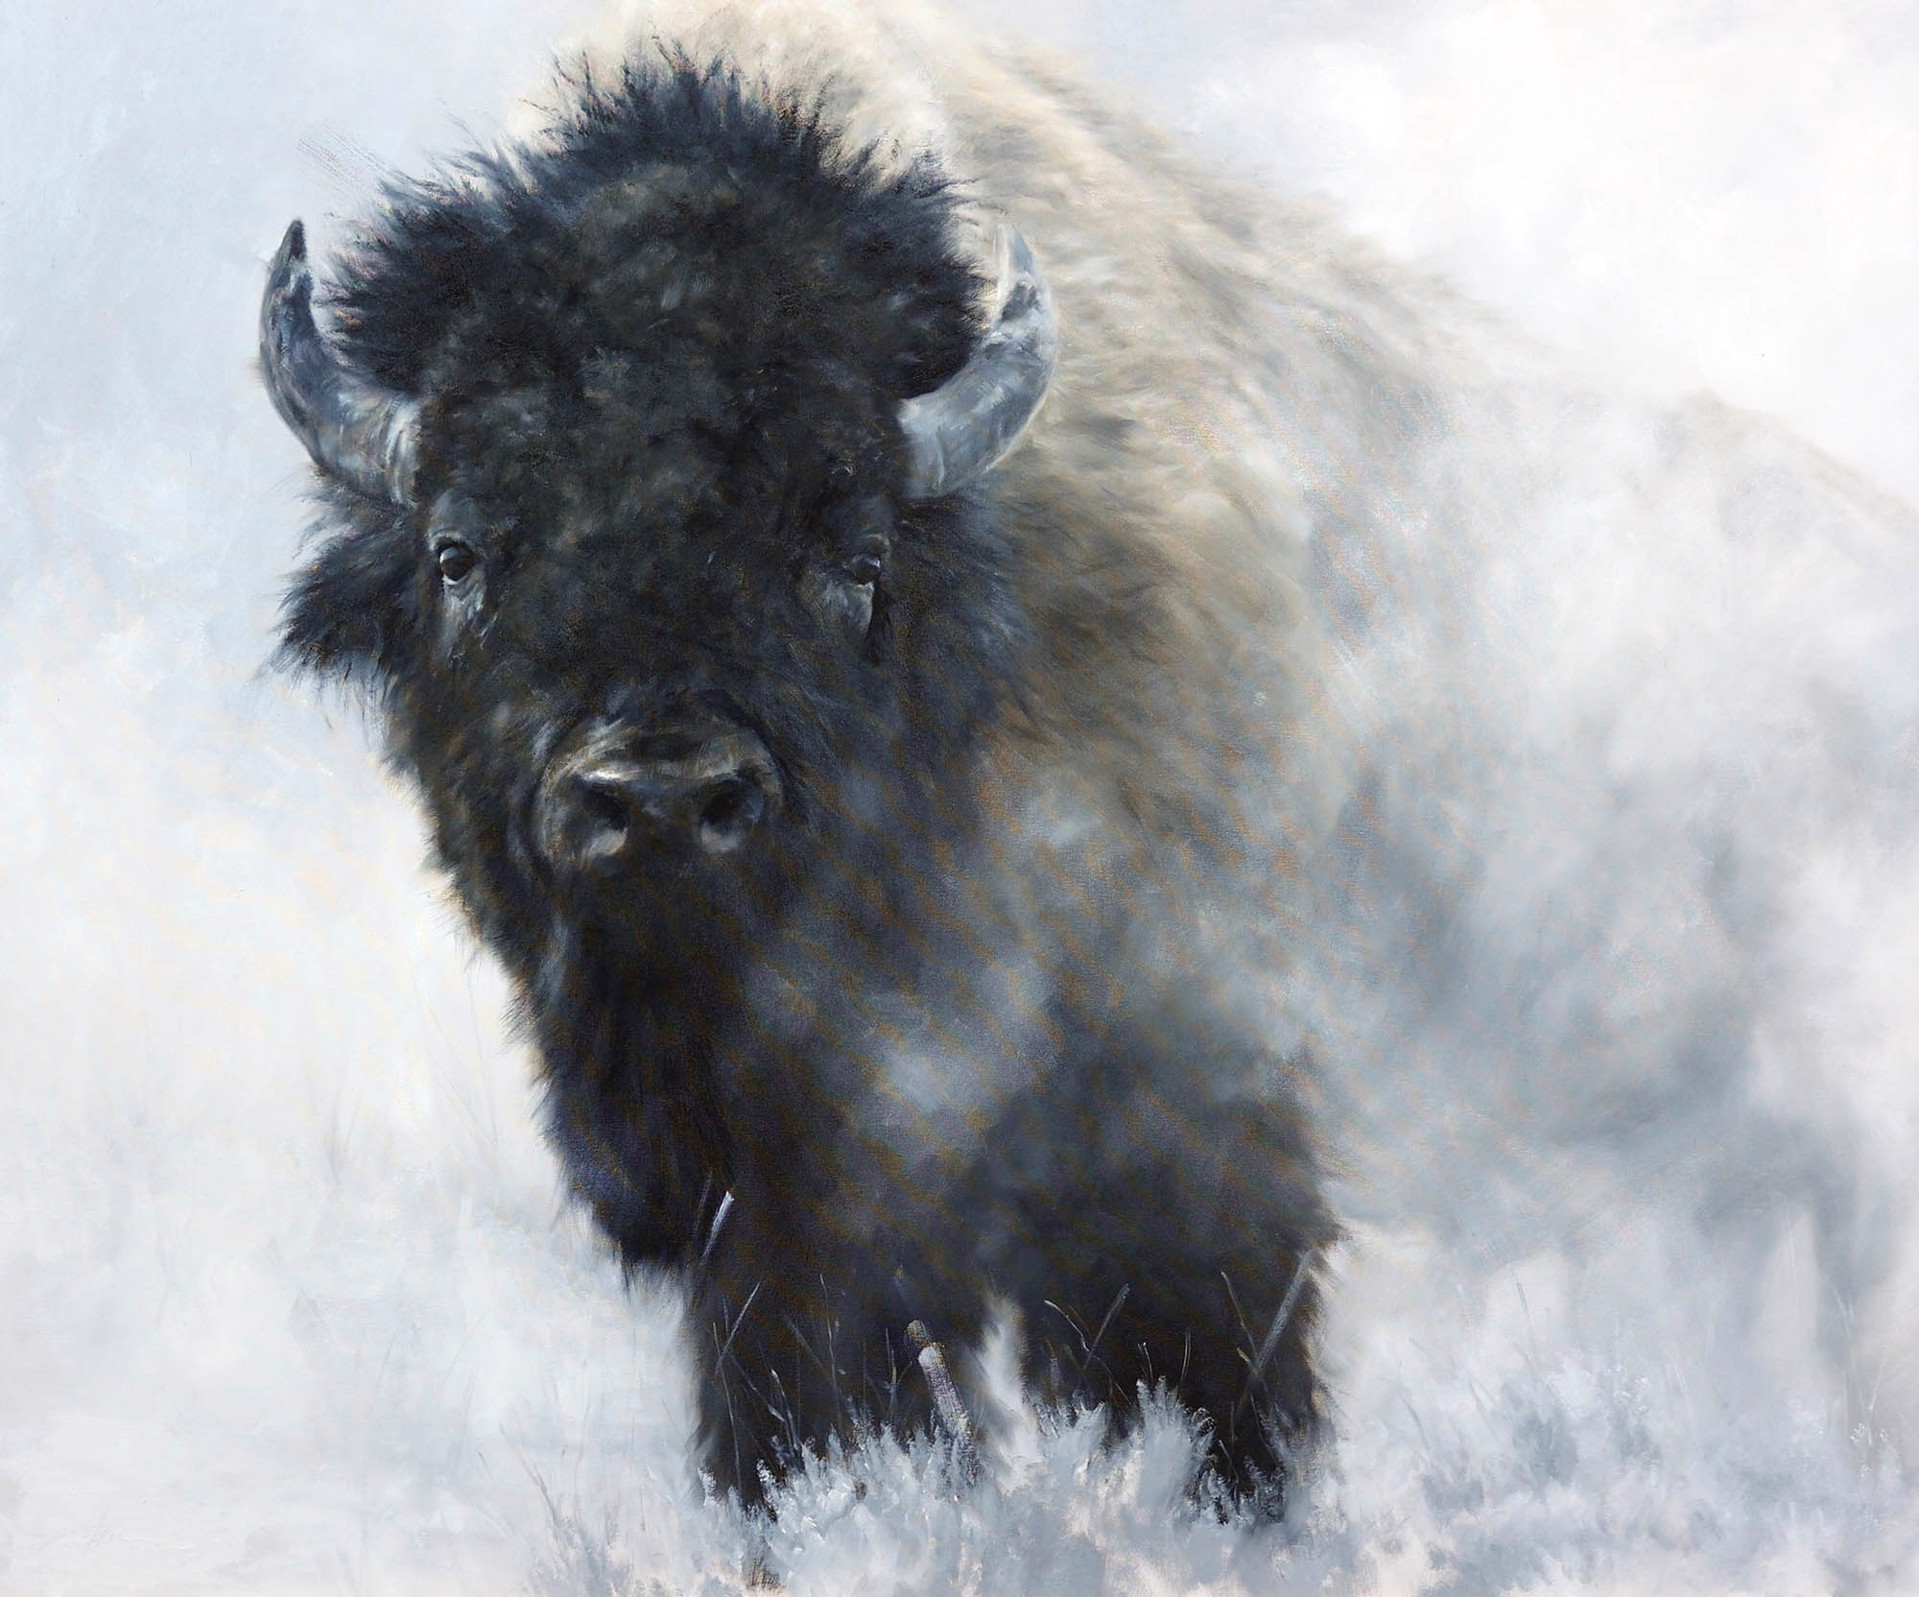 Original Oil Painting By Doyle Hostetler Featuring A Bison In A Neutral Black And White Color Palette